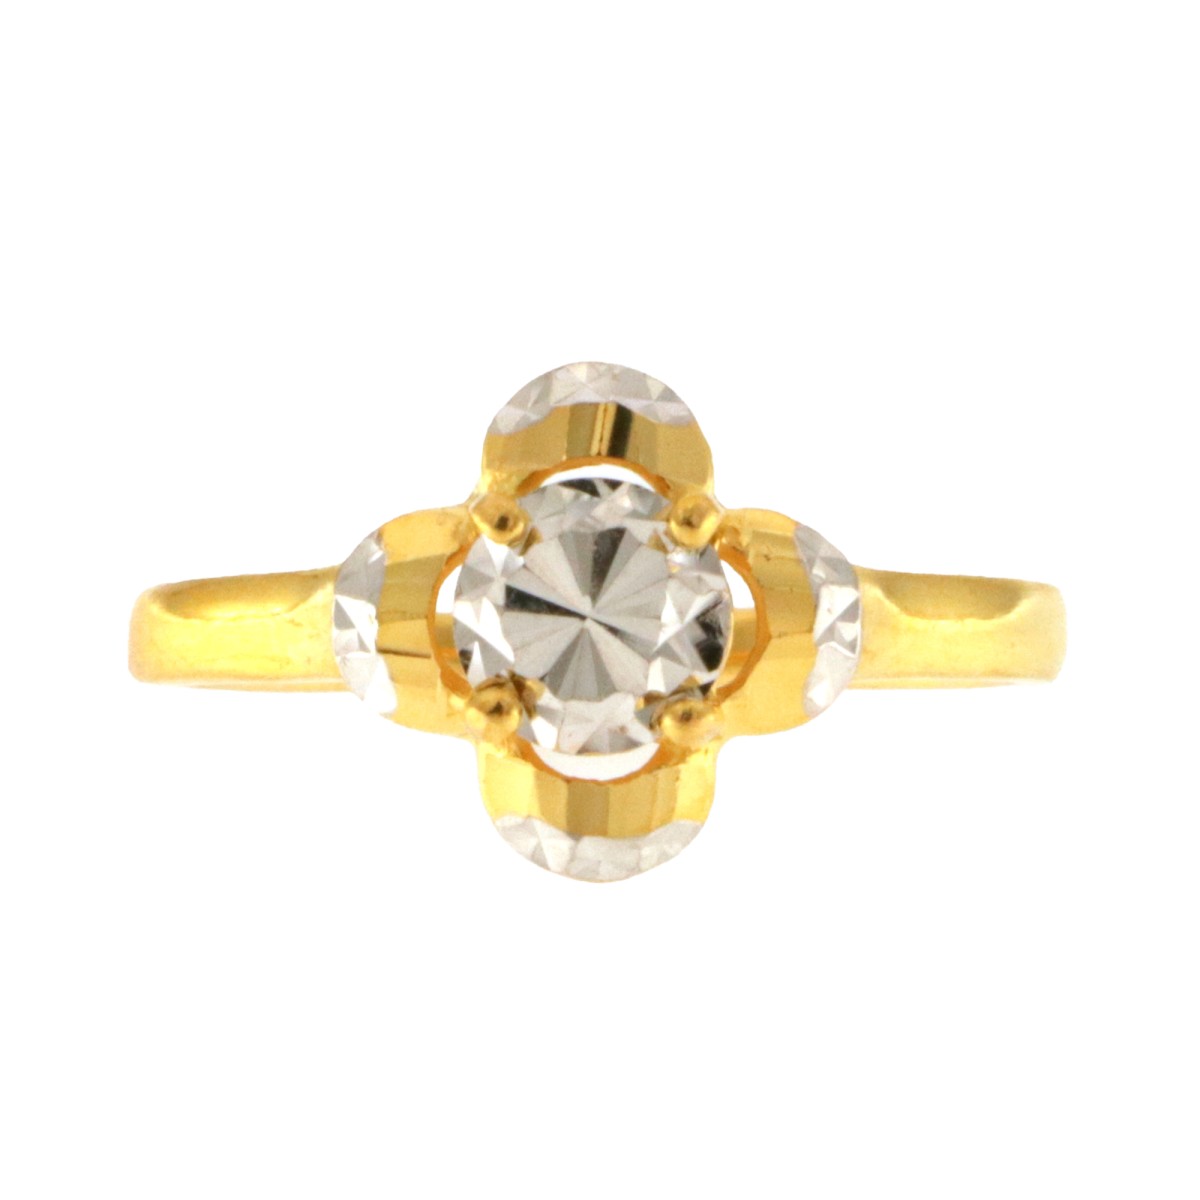 22ct Two Colour Gold Ring | 3.1g